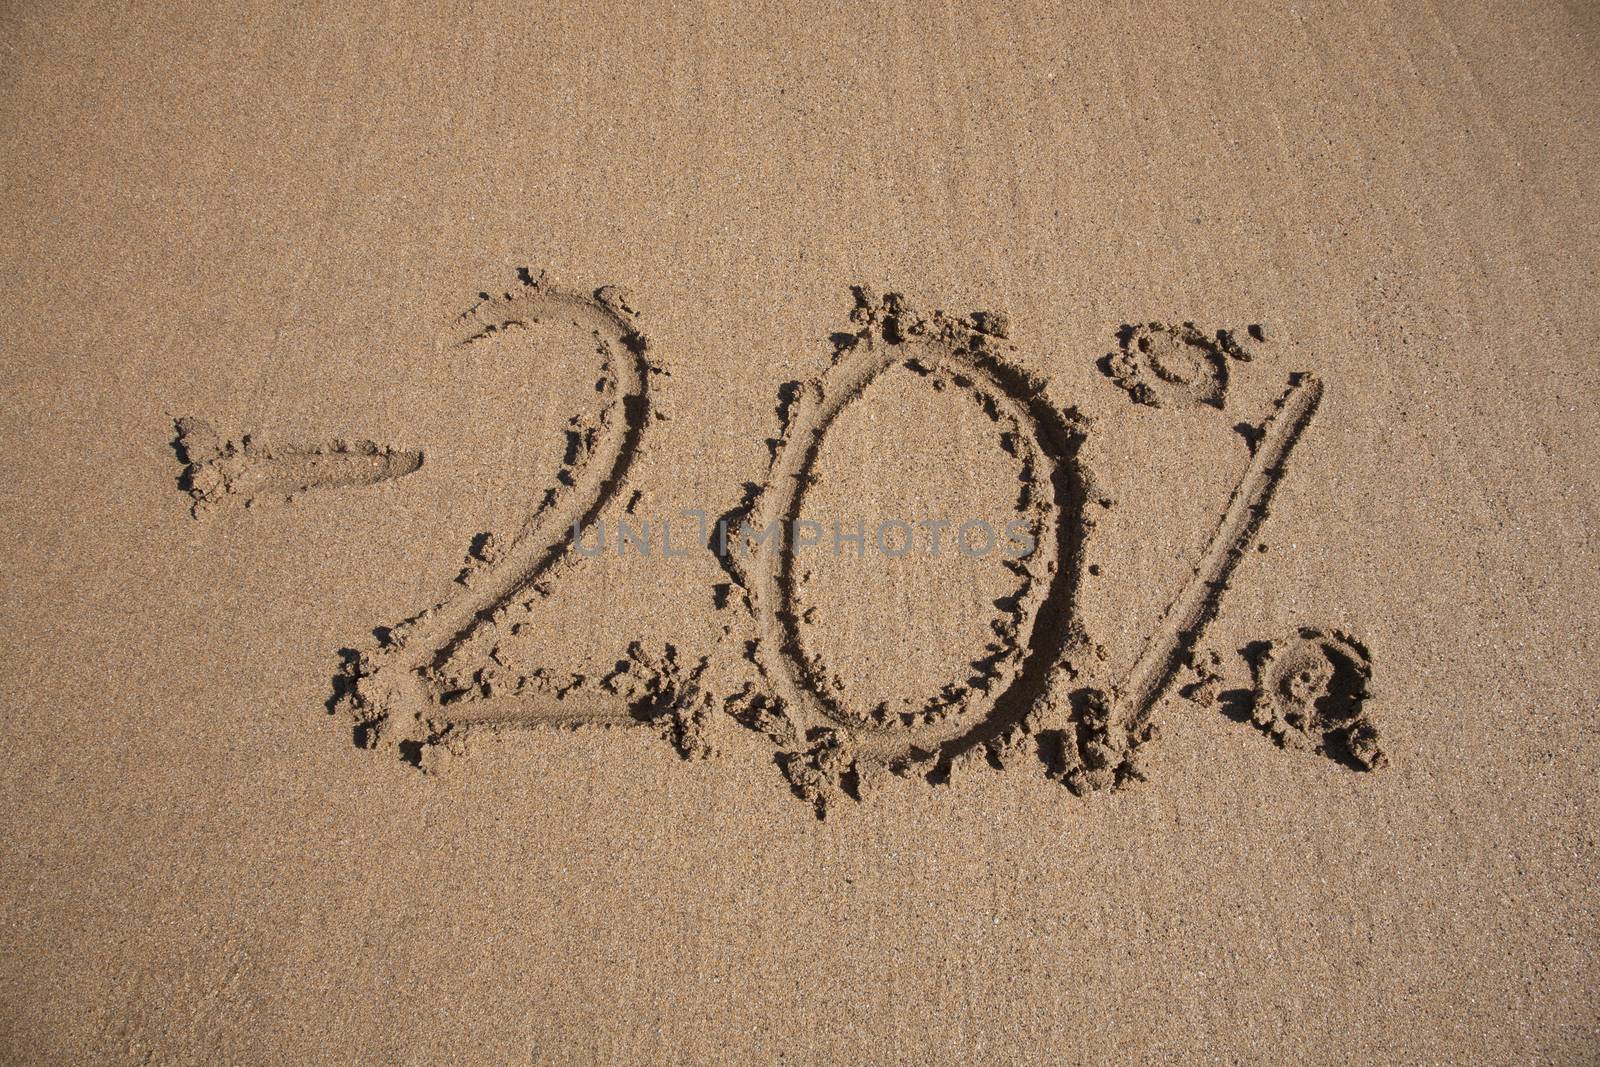 20 per cent discount in earth text written on brown sand ground low tide beach ocean seashore in Spain Europe